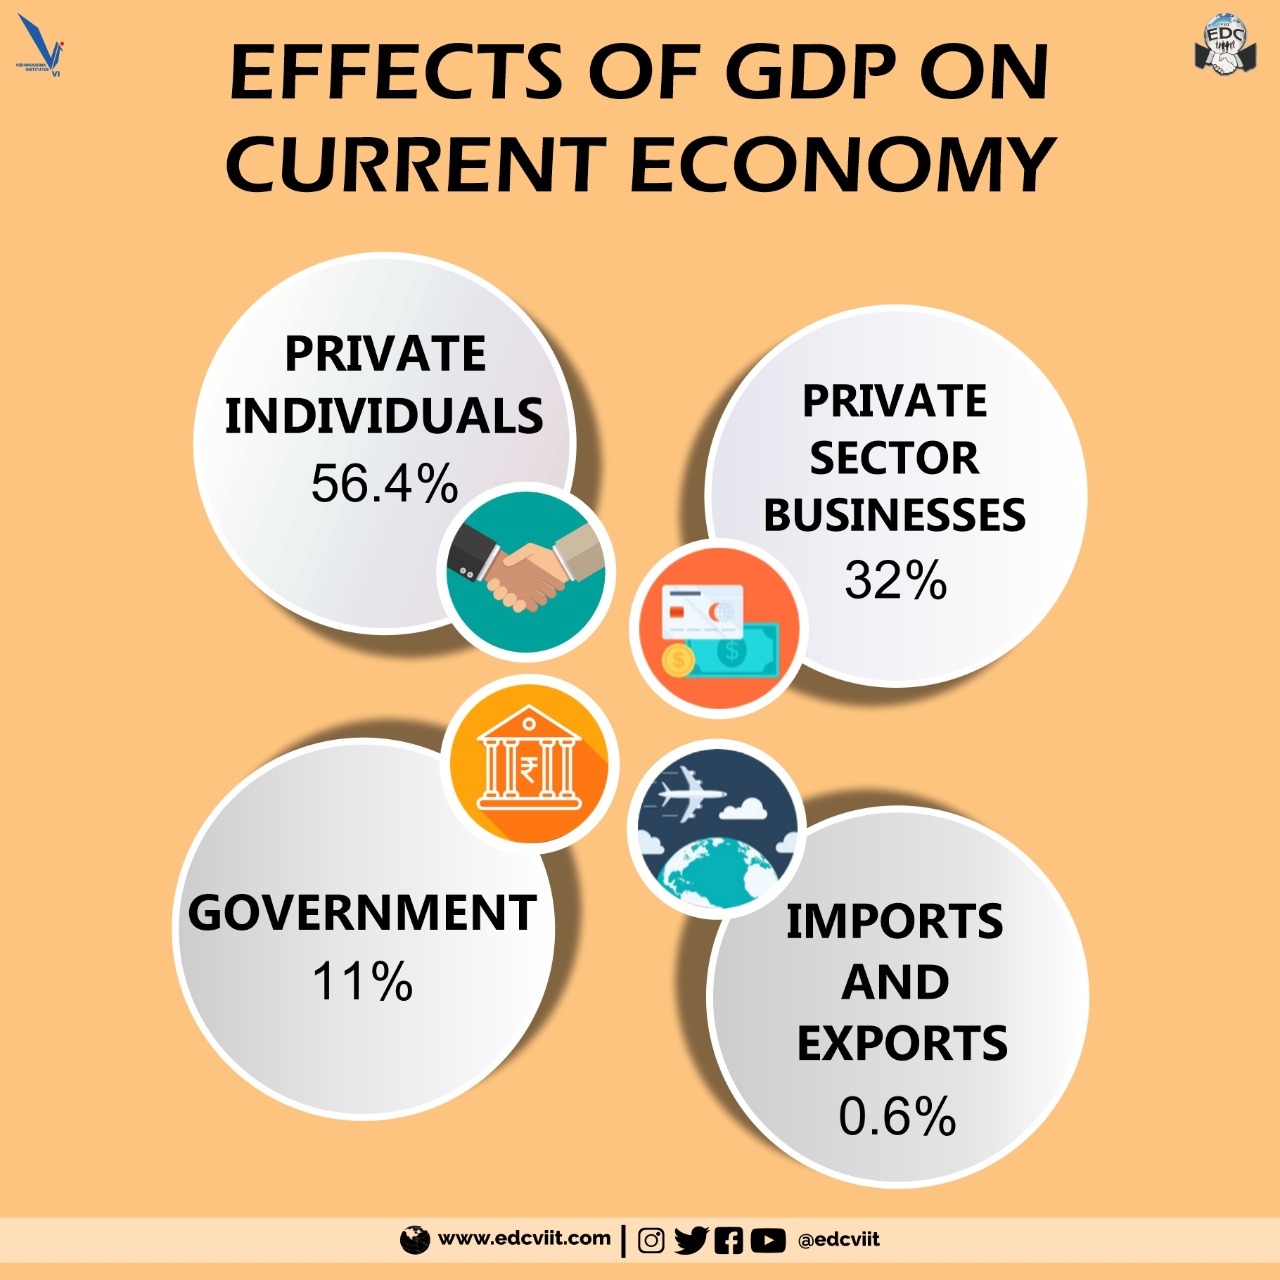 Effects of GDP on the Current Economy